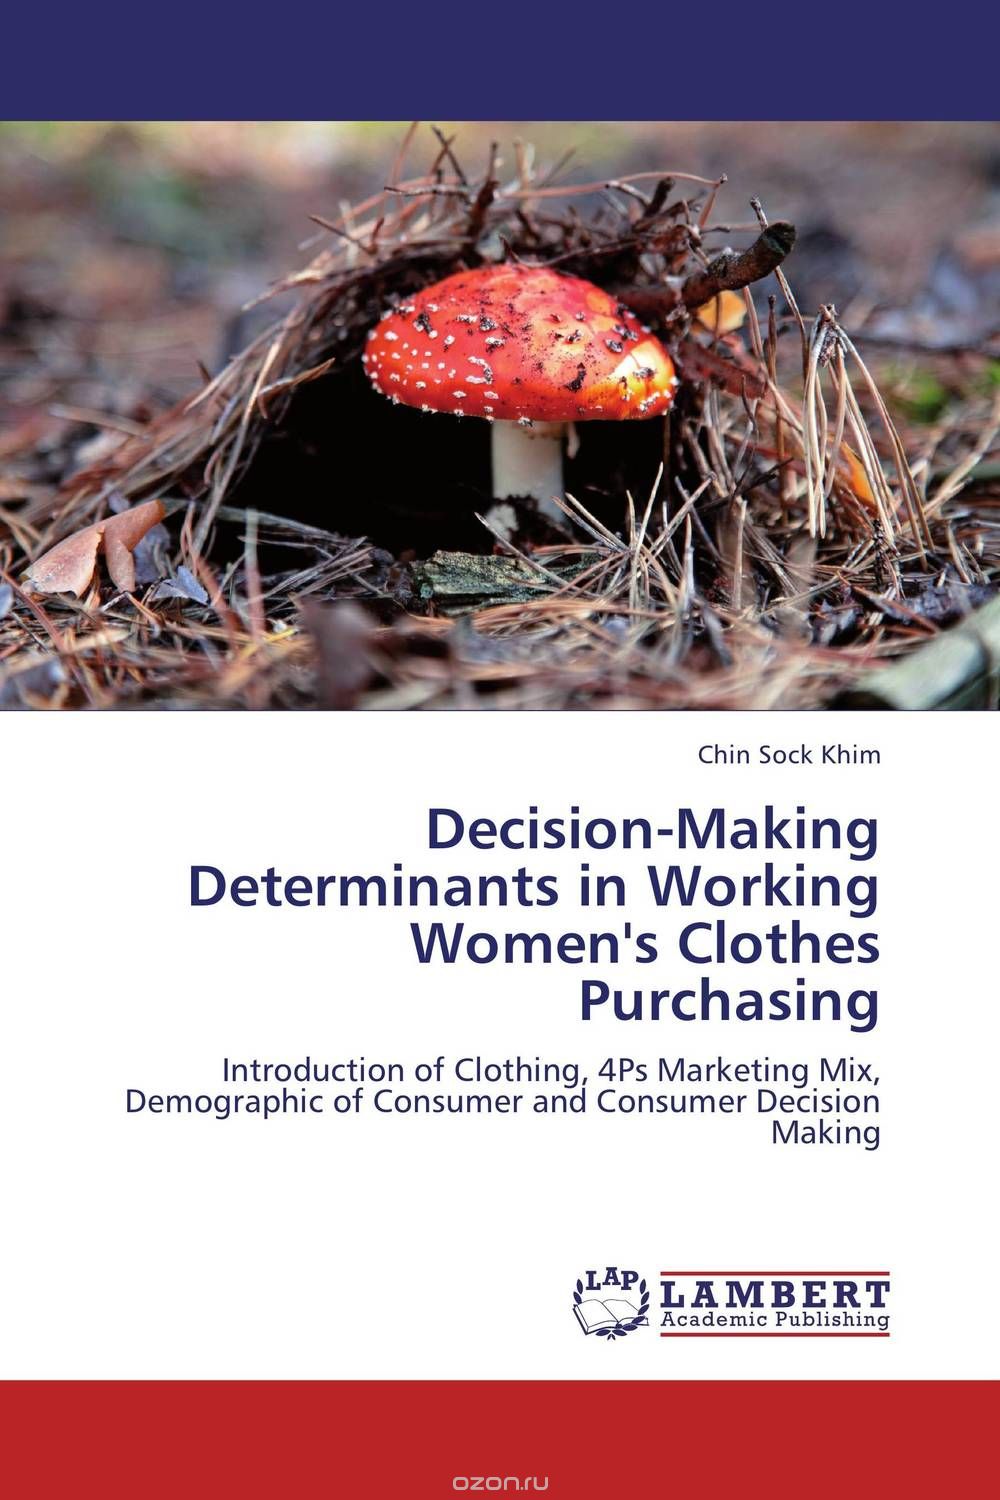 Decision-Making Determinants in Working Women's Clothes Purchasing